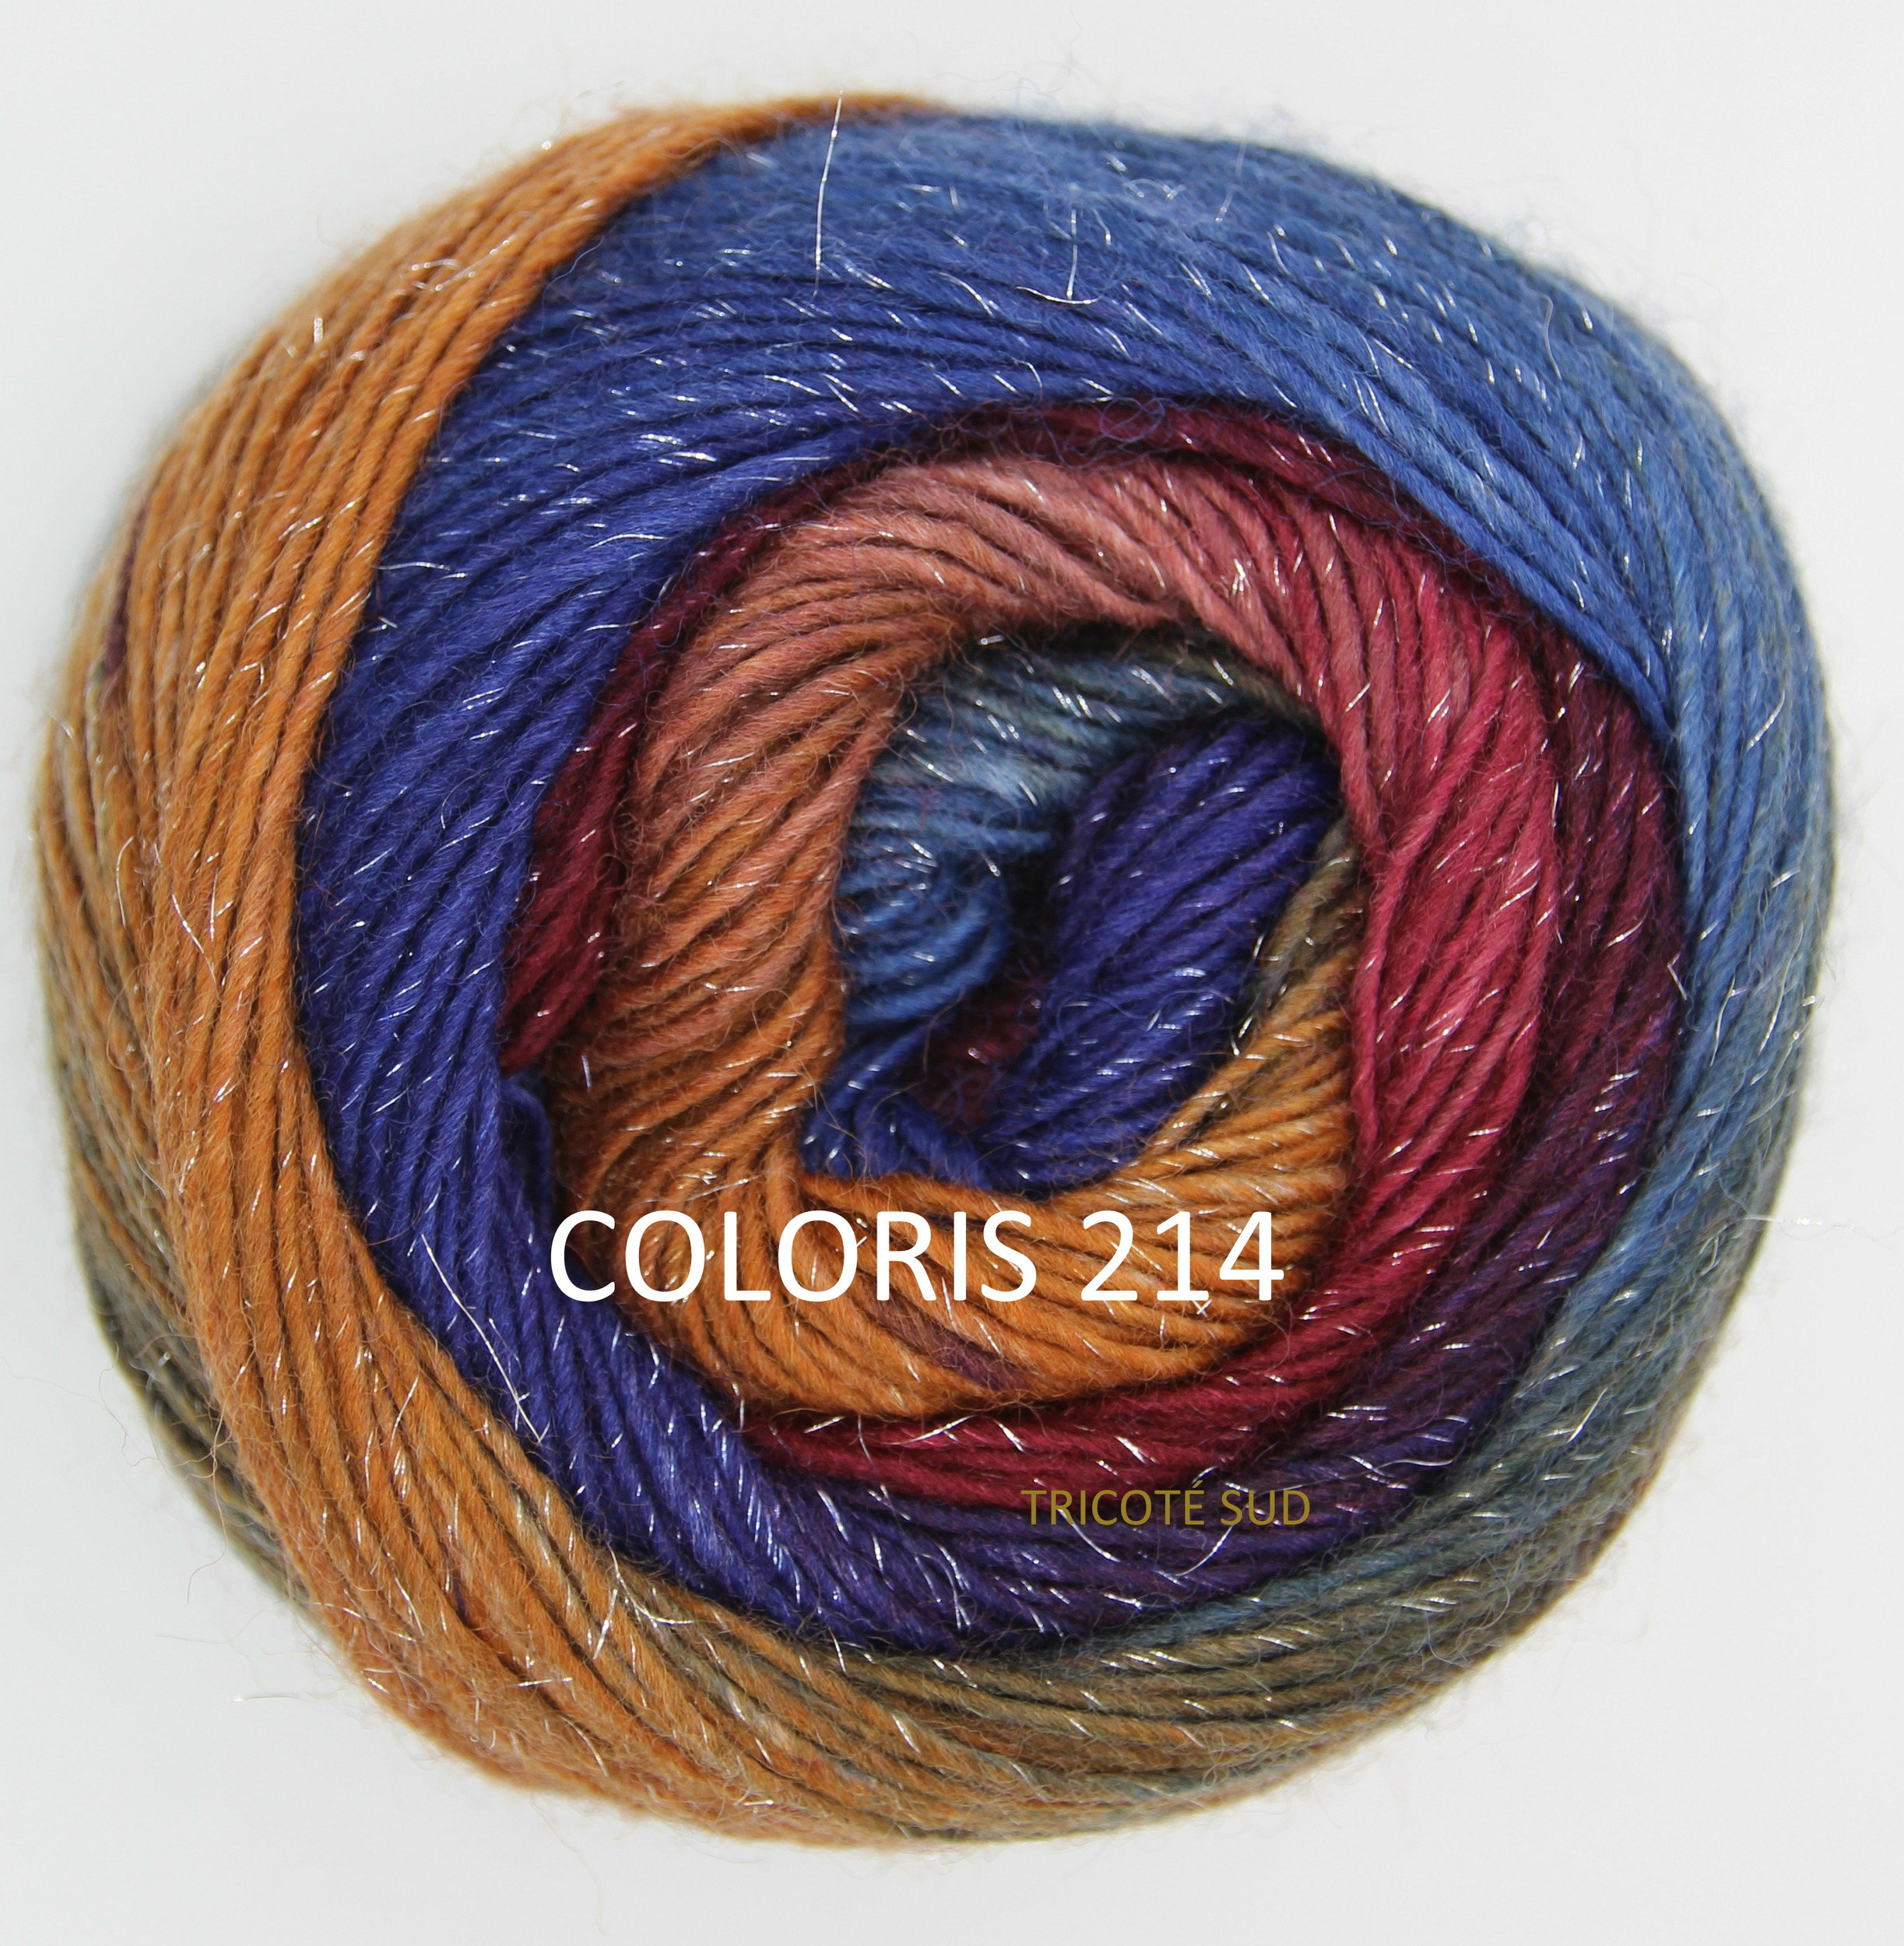 MILLE COLORI SOCKS AND LACE LUXE COLORIS 214 (1)